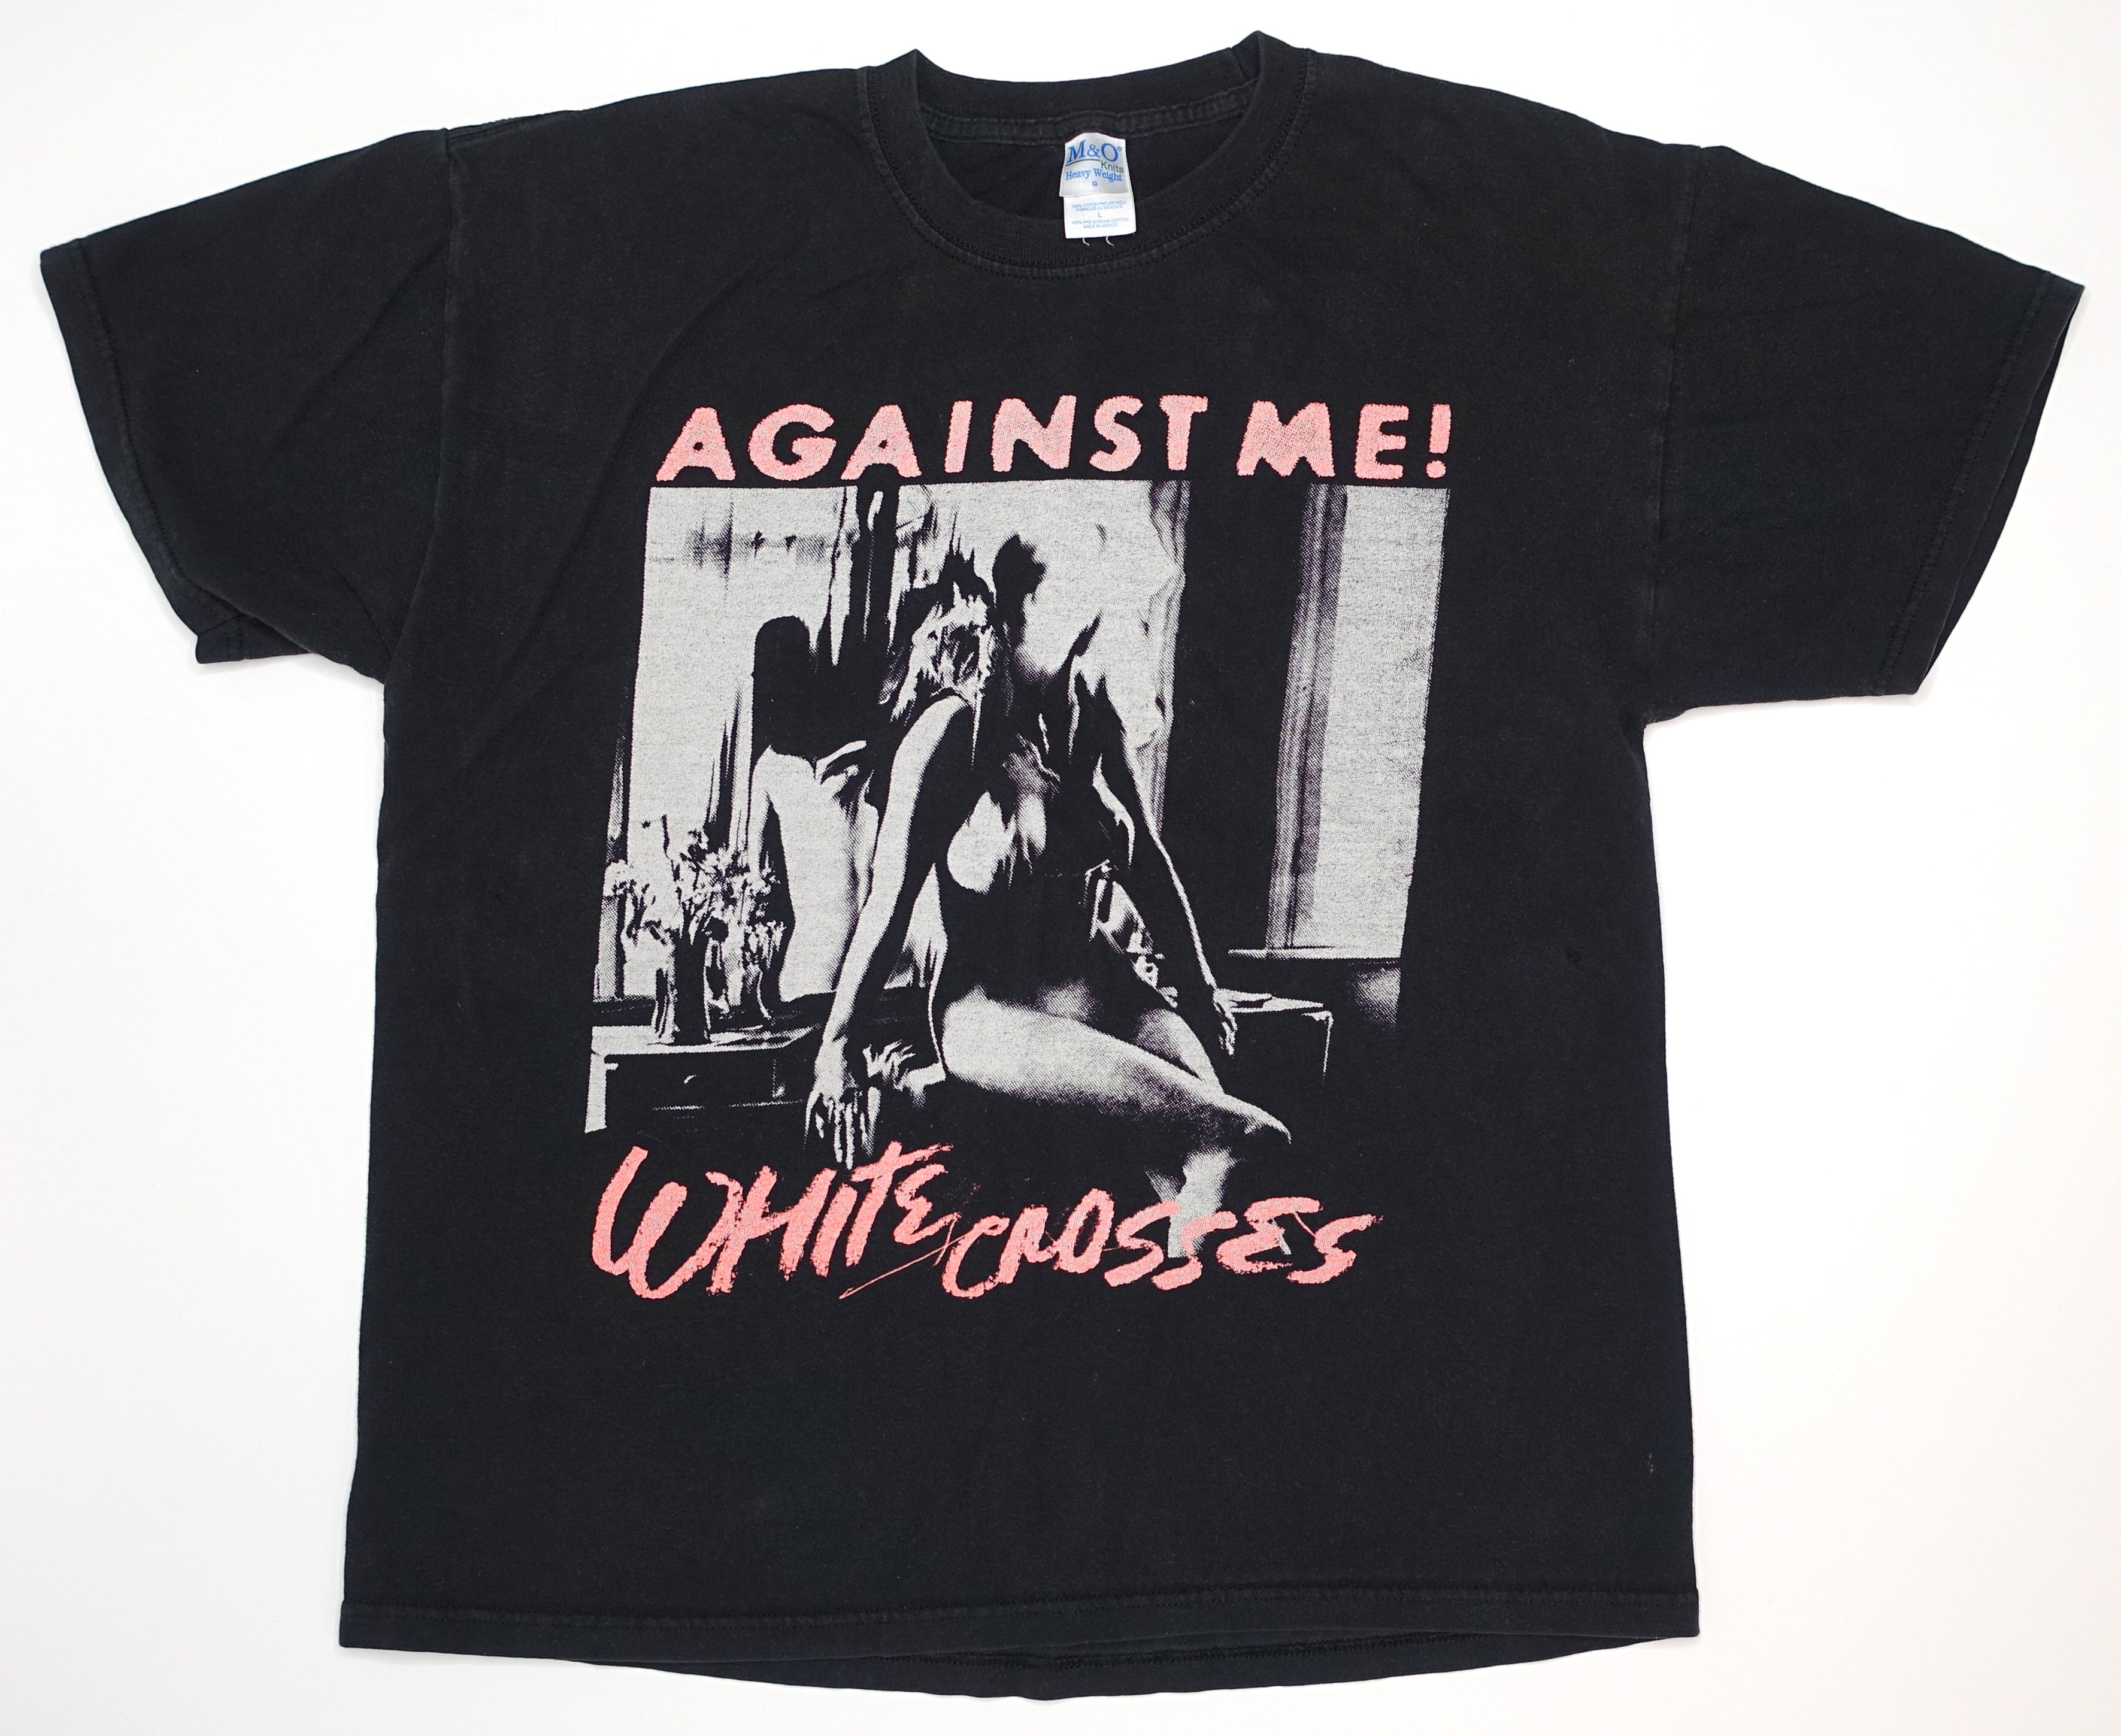 Against Me! - I Want To Smash Them All White Crosses 2011 Tour Shirt Size Large